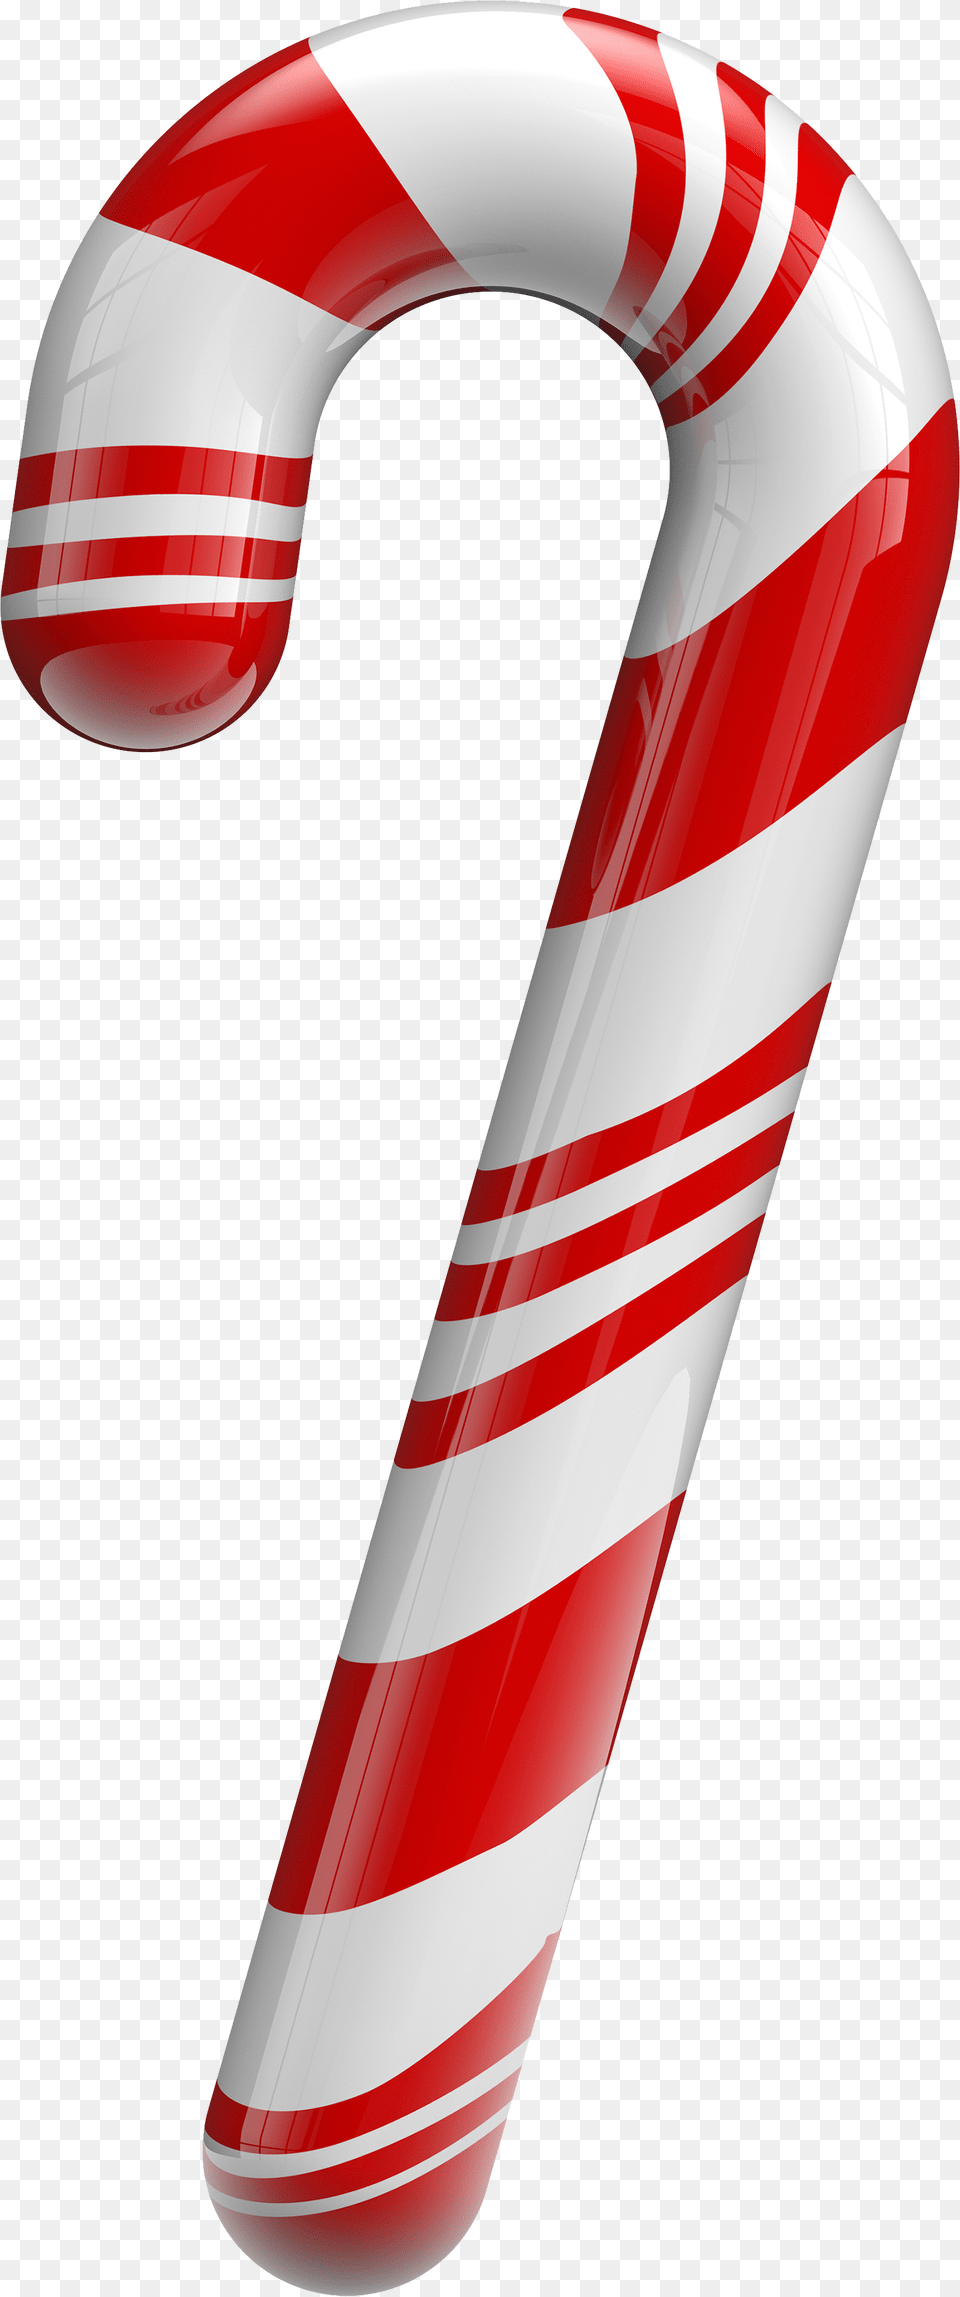 Christmas Candy, Food, Sweets, Stick, Appliance Png Image